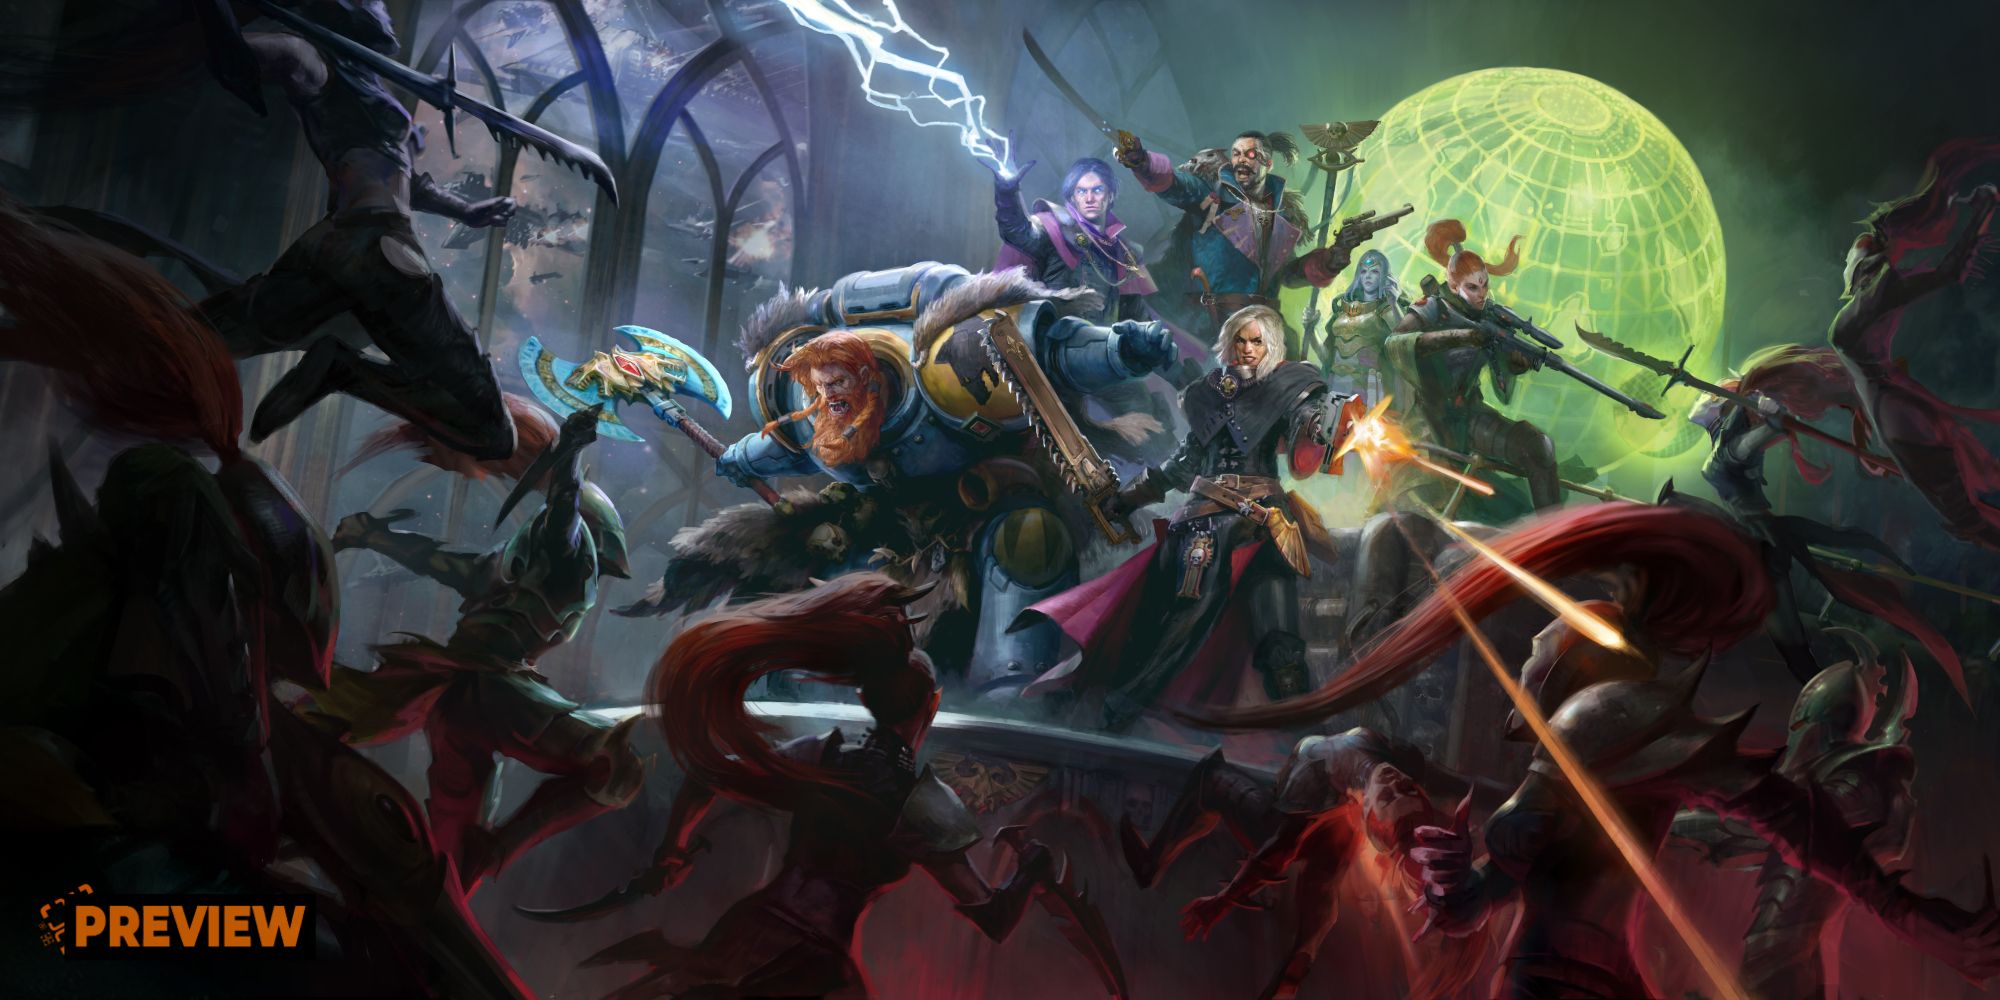 key art for Warhammer 40,000: Rogue Trader featuring a Loyalist party in combat.